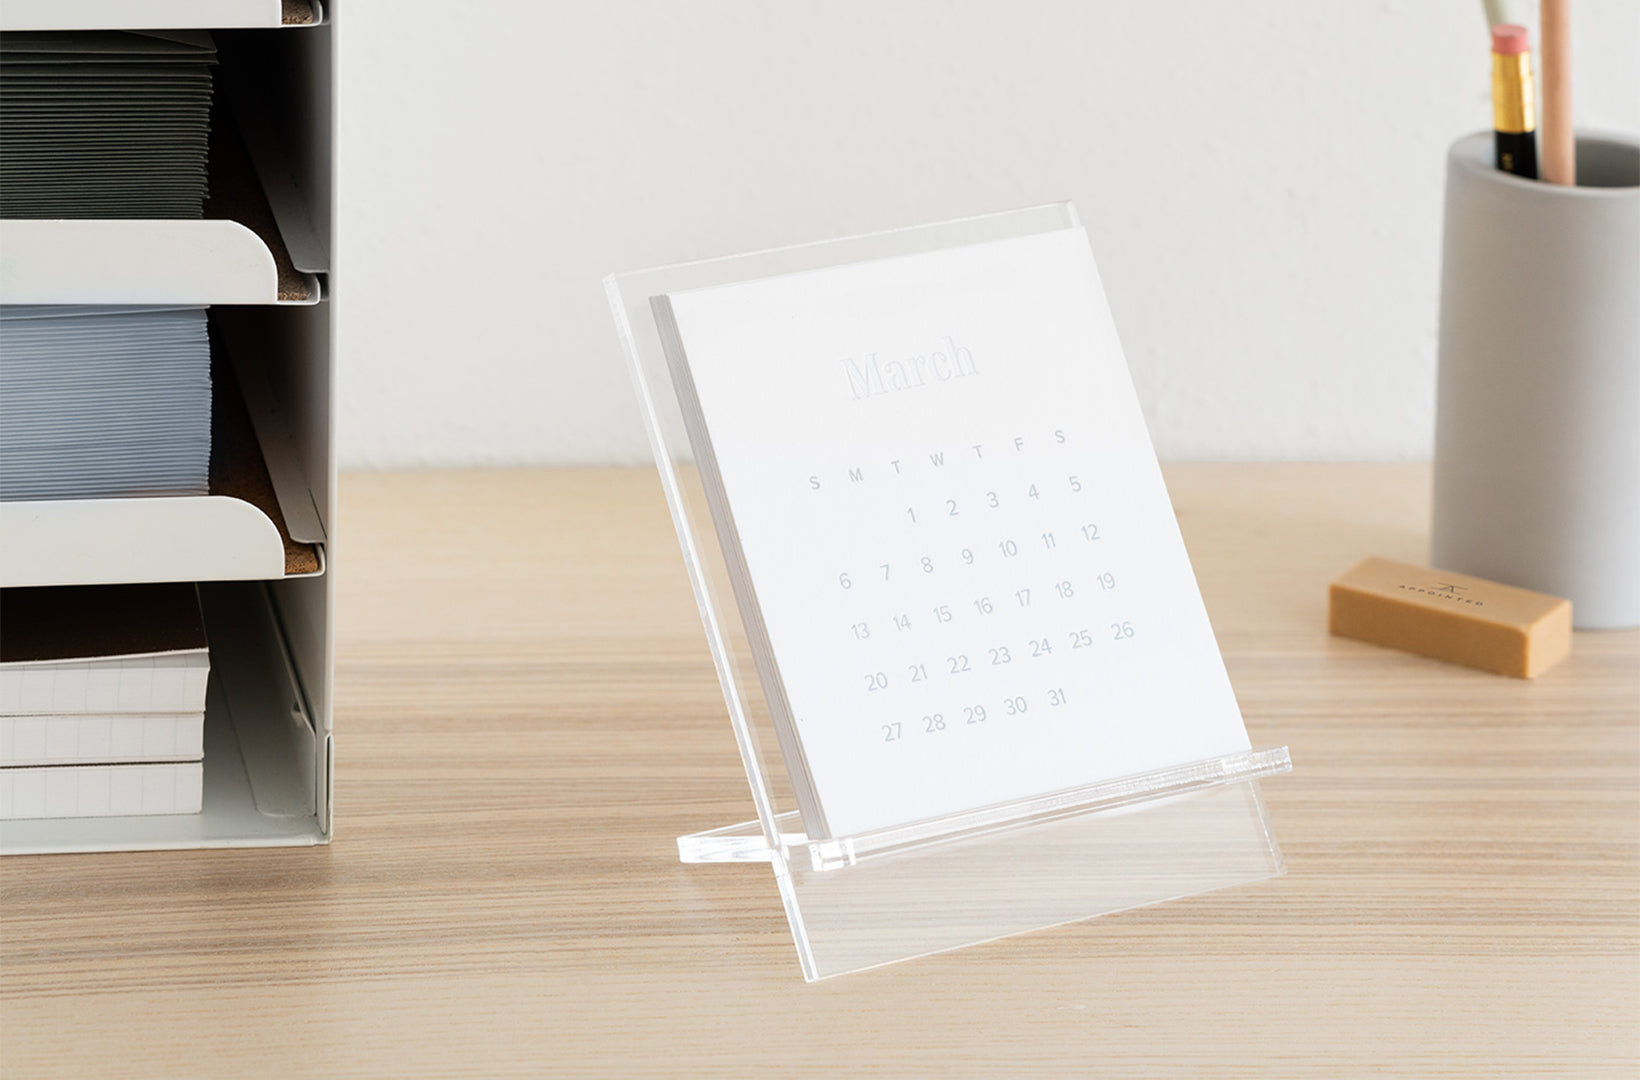 The 2022 Acrylic desk calendar sits atop a wood desk with other desk accessories including a pencil cup, erase, and file organizer